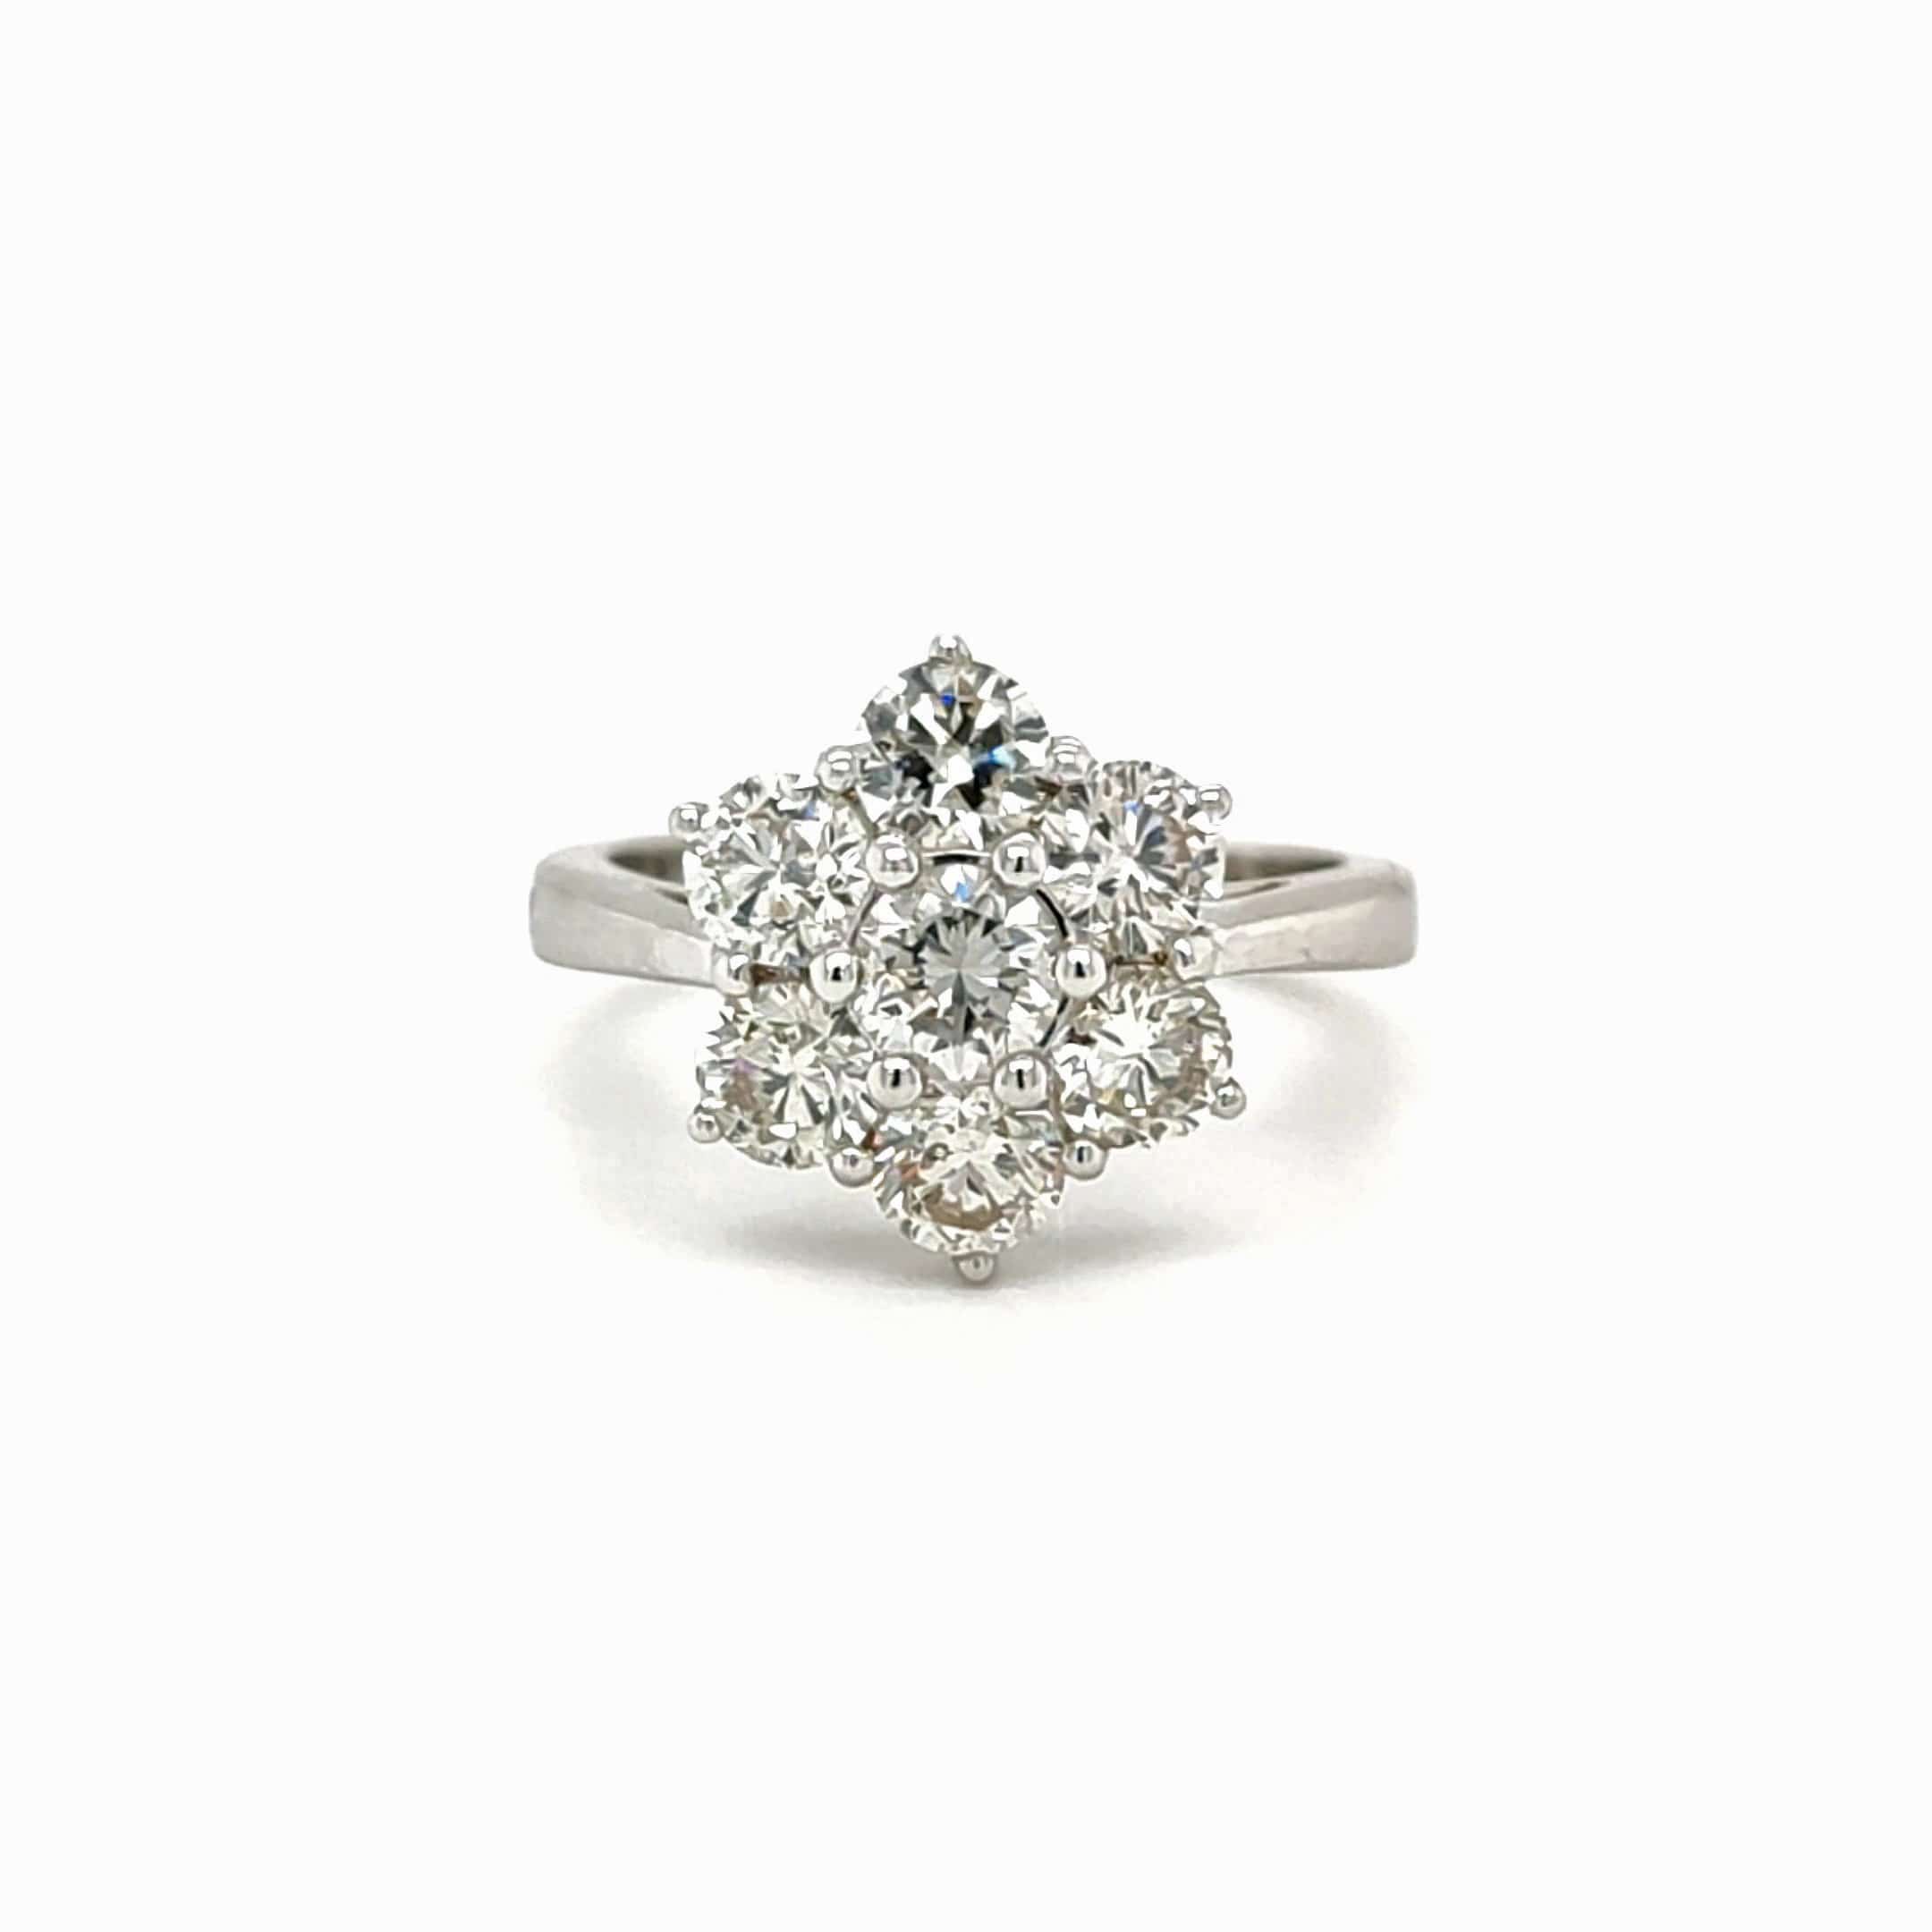 2.46ct, 18ct White Gold Brilliant Cut Diamond Cluster Ring – Pre-Owned